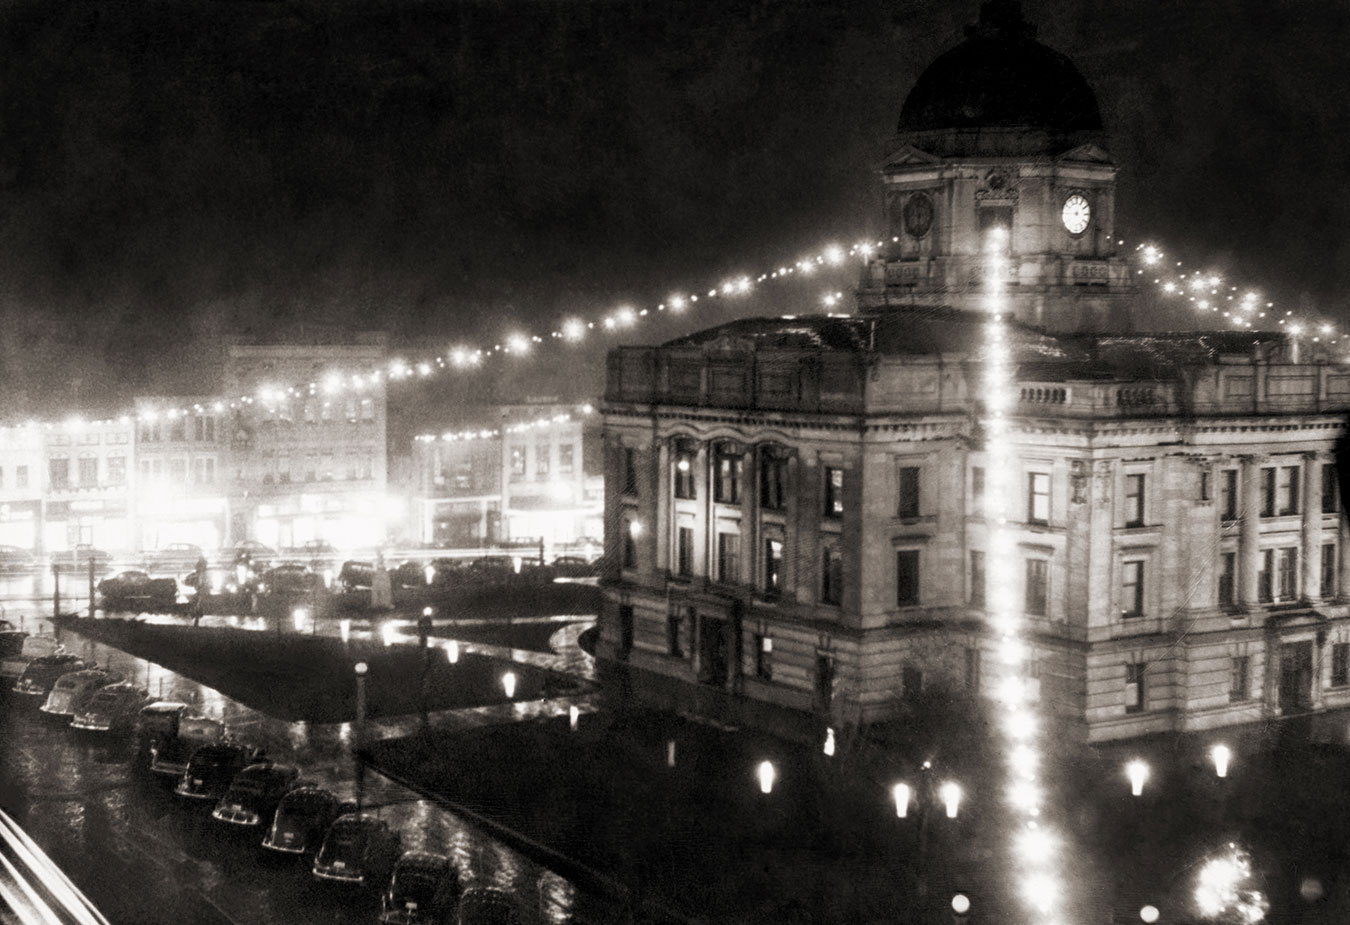 The Canopy of Lights in the 1930s. | Photo courtesy of The Monroe County History Center, ©The Monroe County History Center Collection